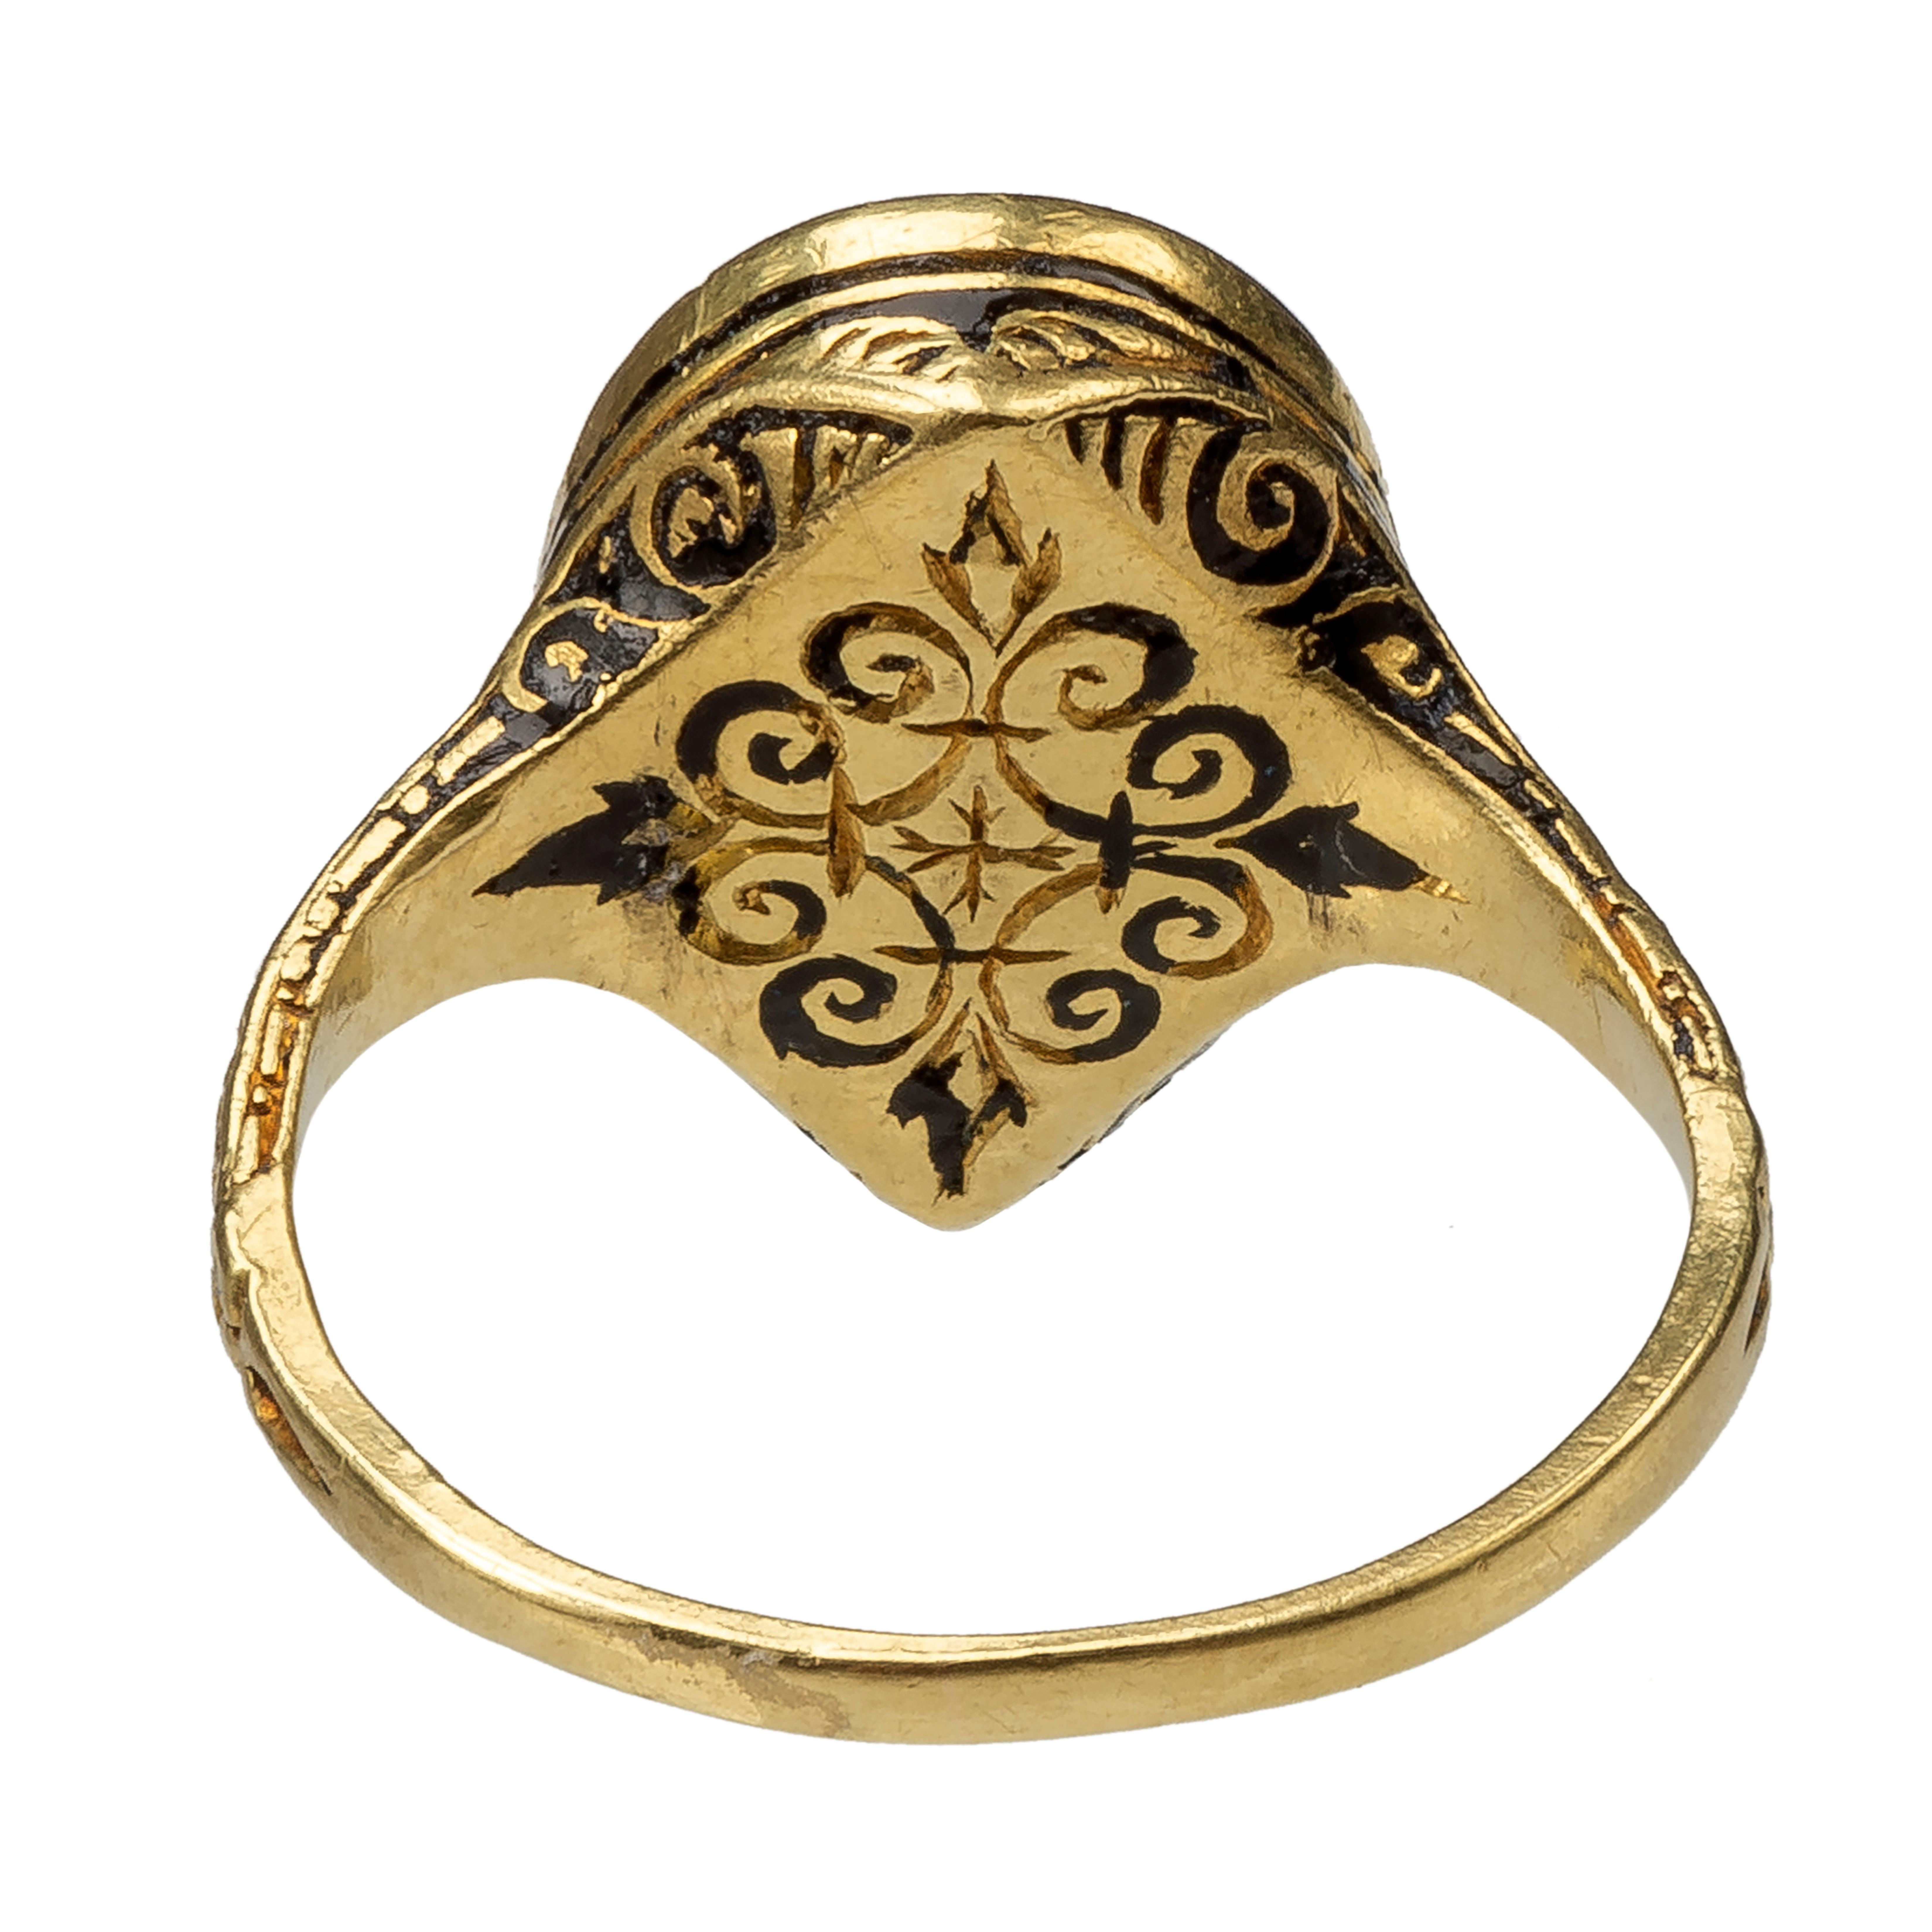 horse signet ring meaning